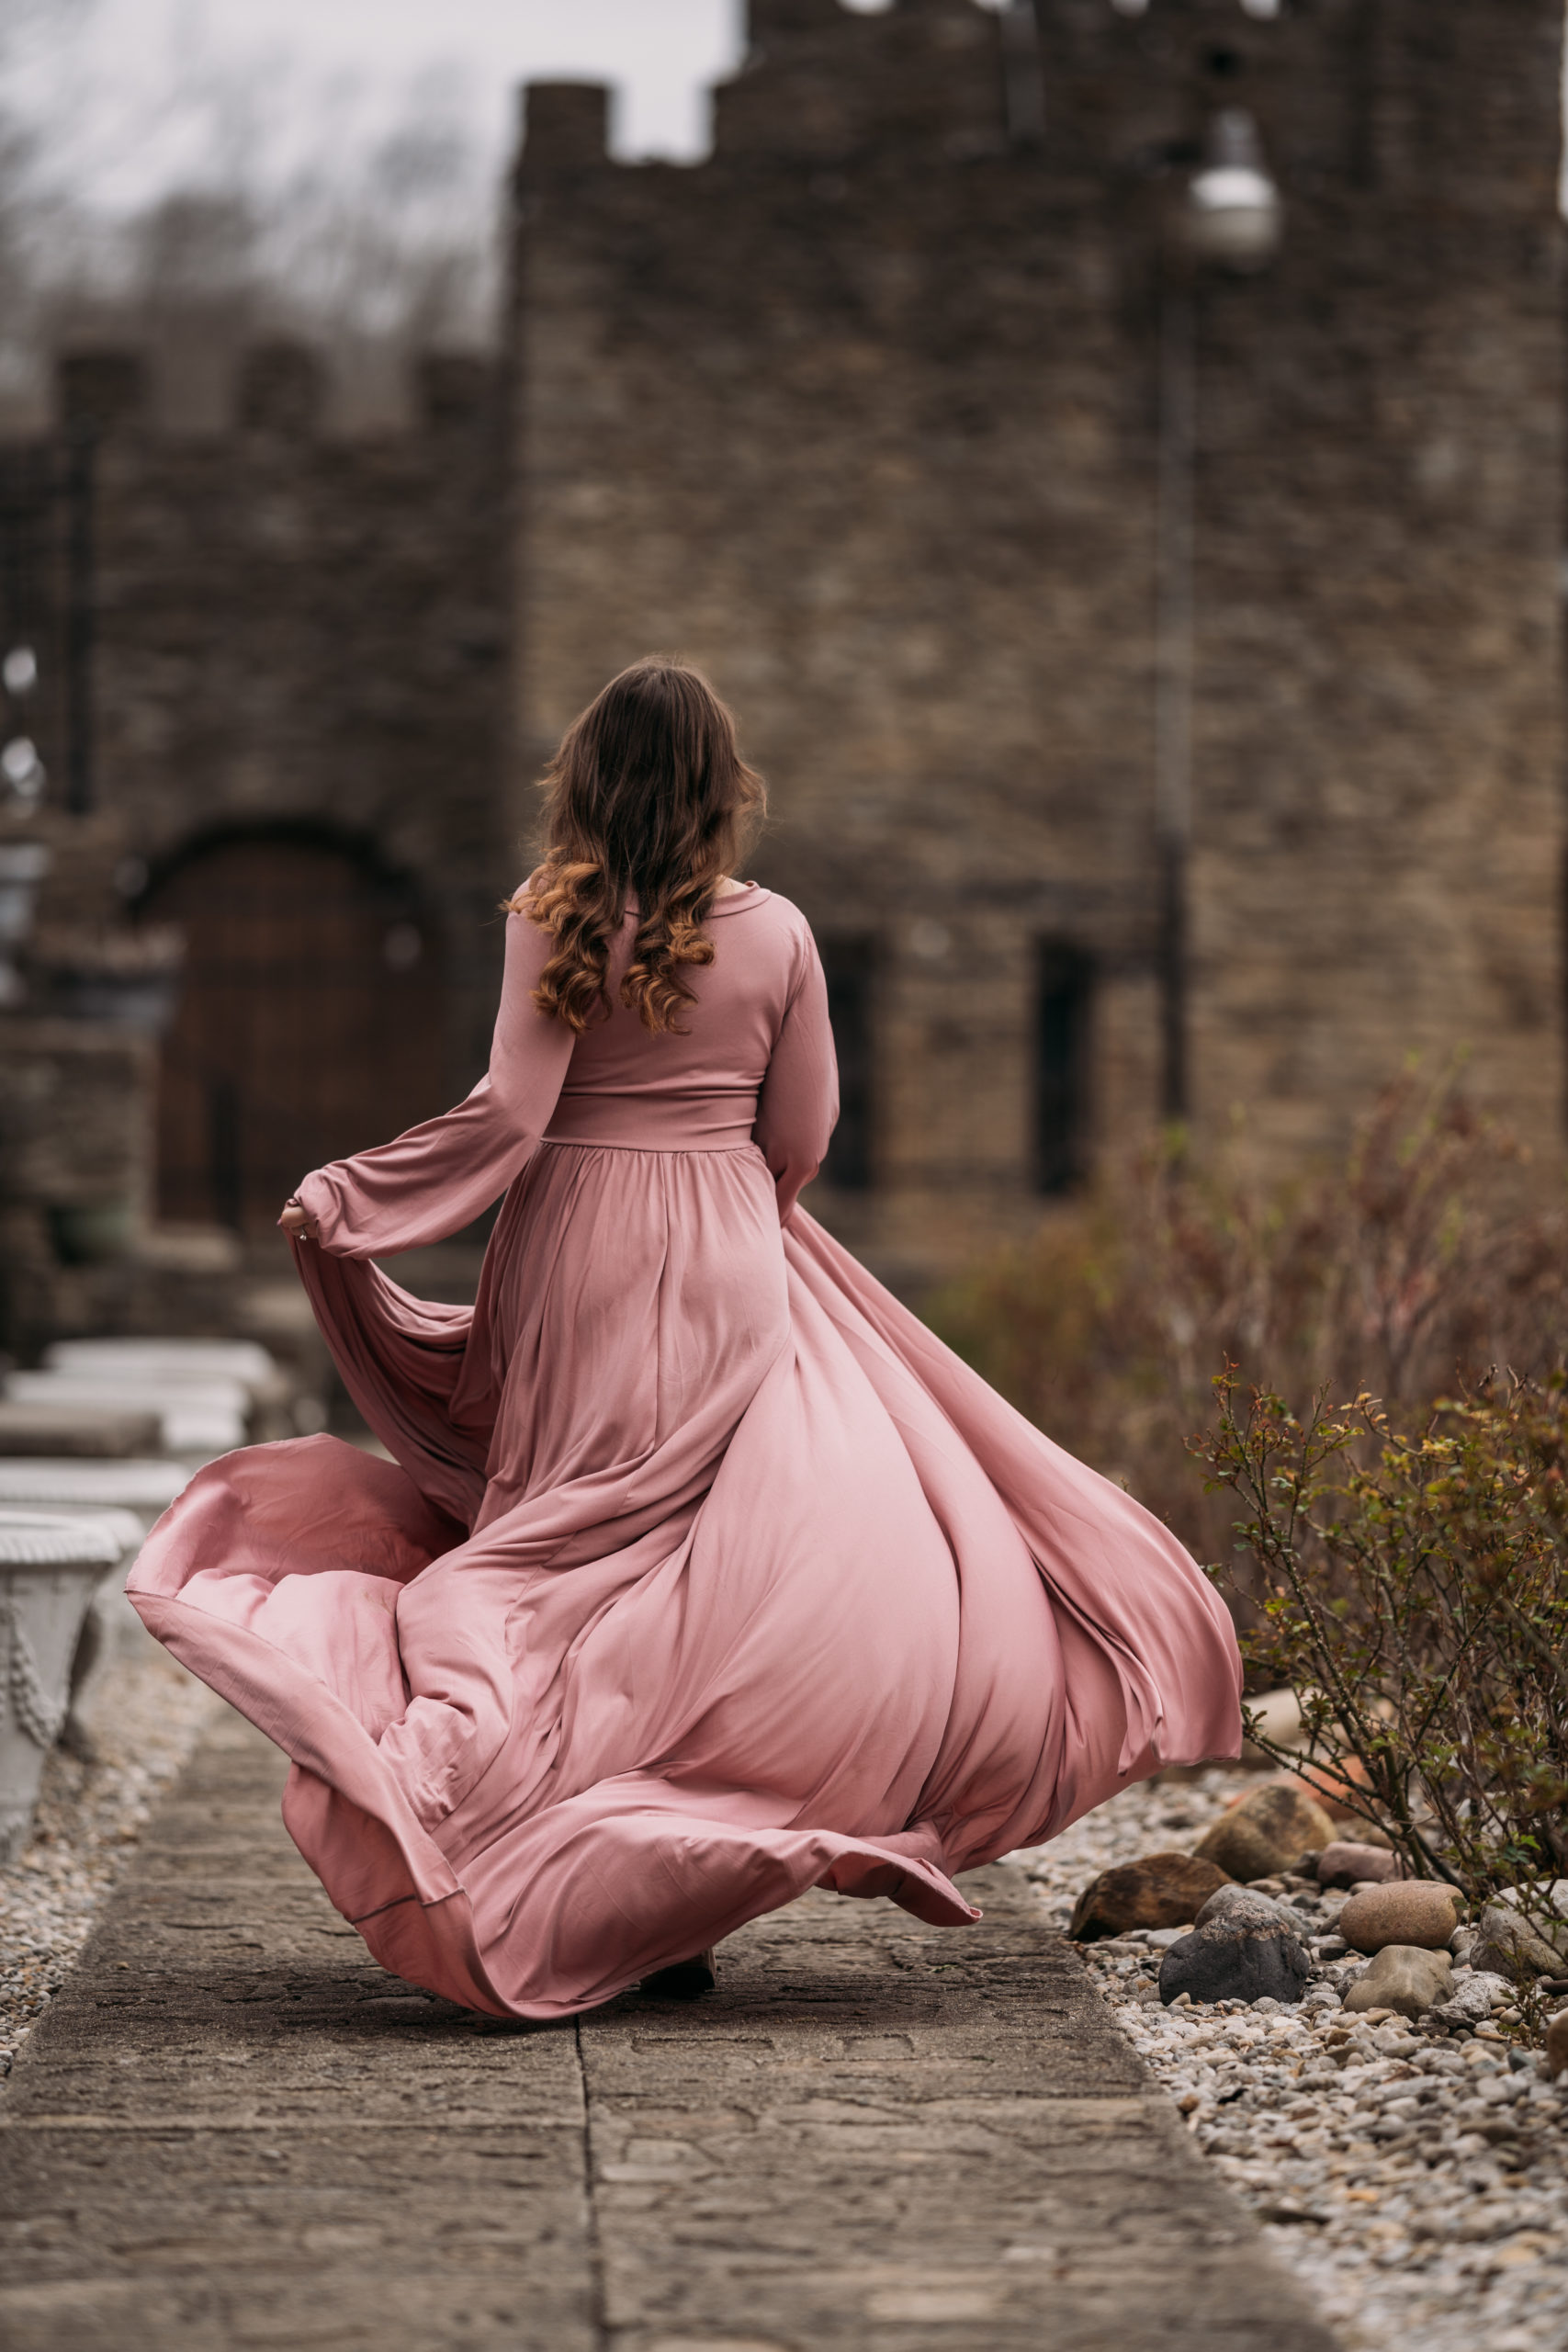 Loveland Castle Senior Session. Flowy dusty rose gown in the gardens. Dramatic fairytale run down the path